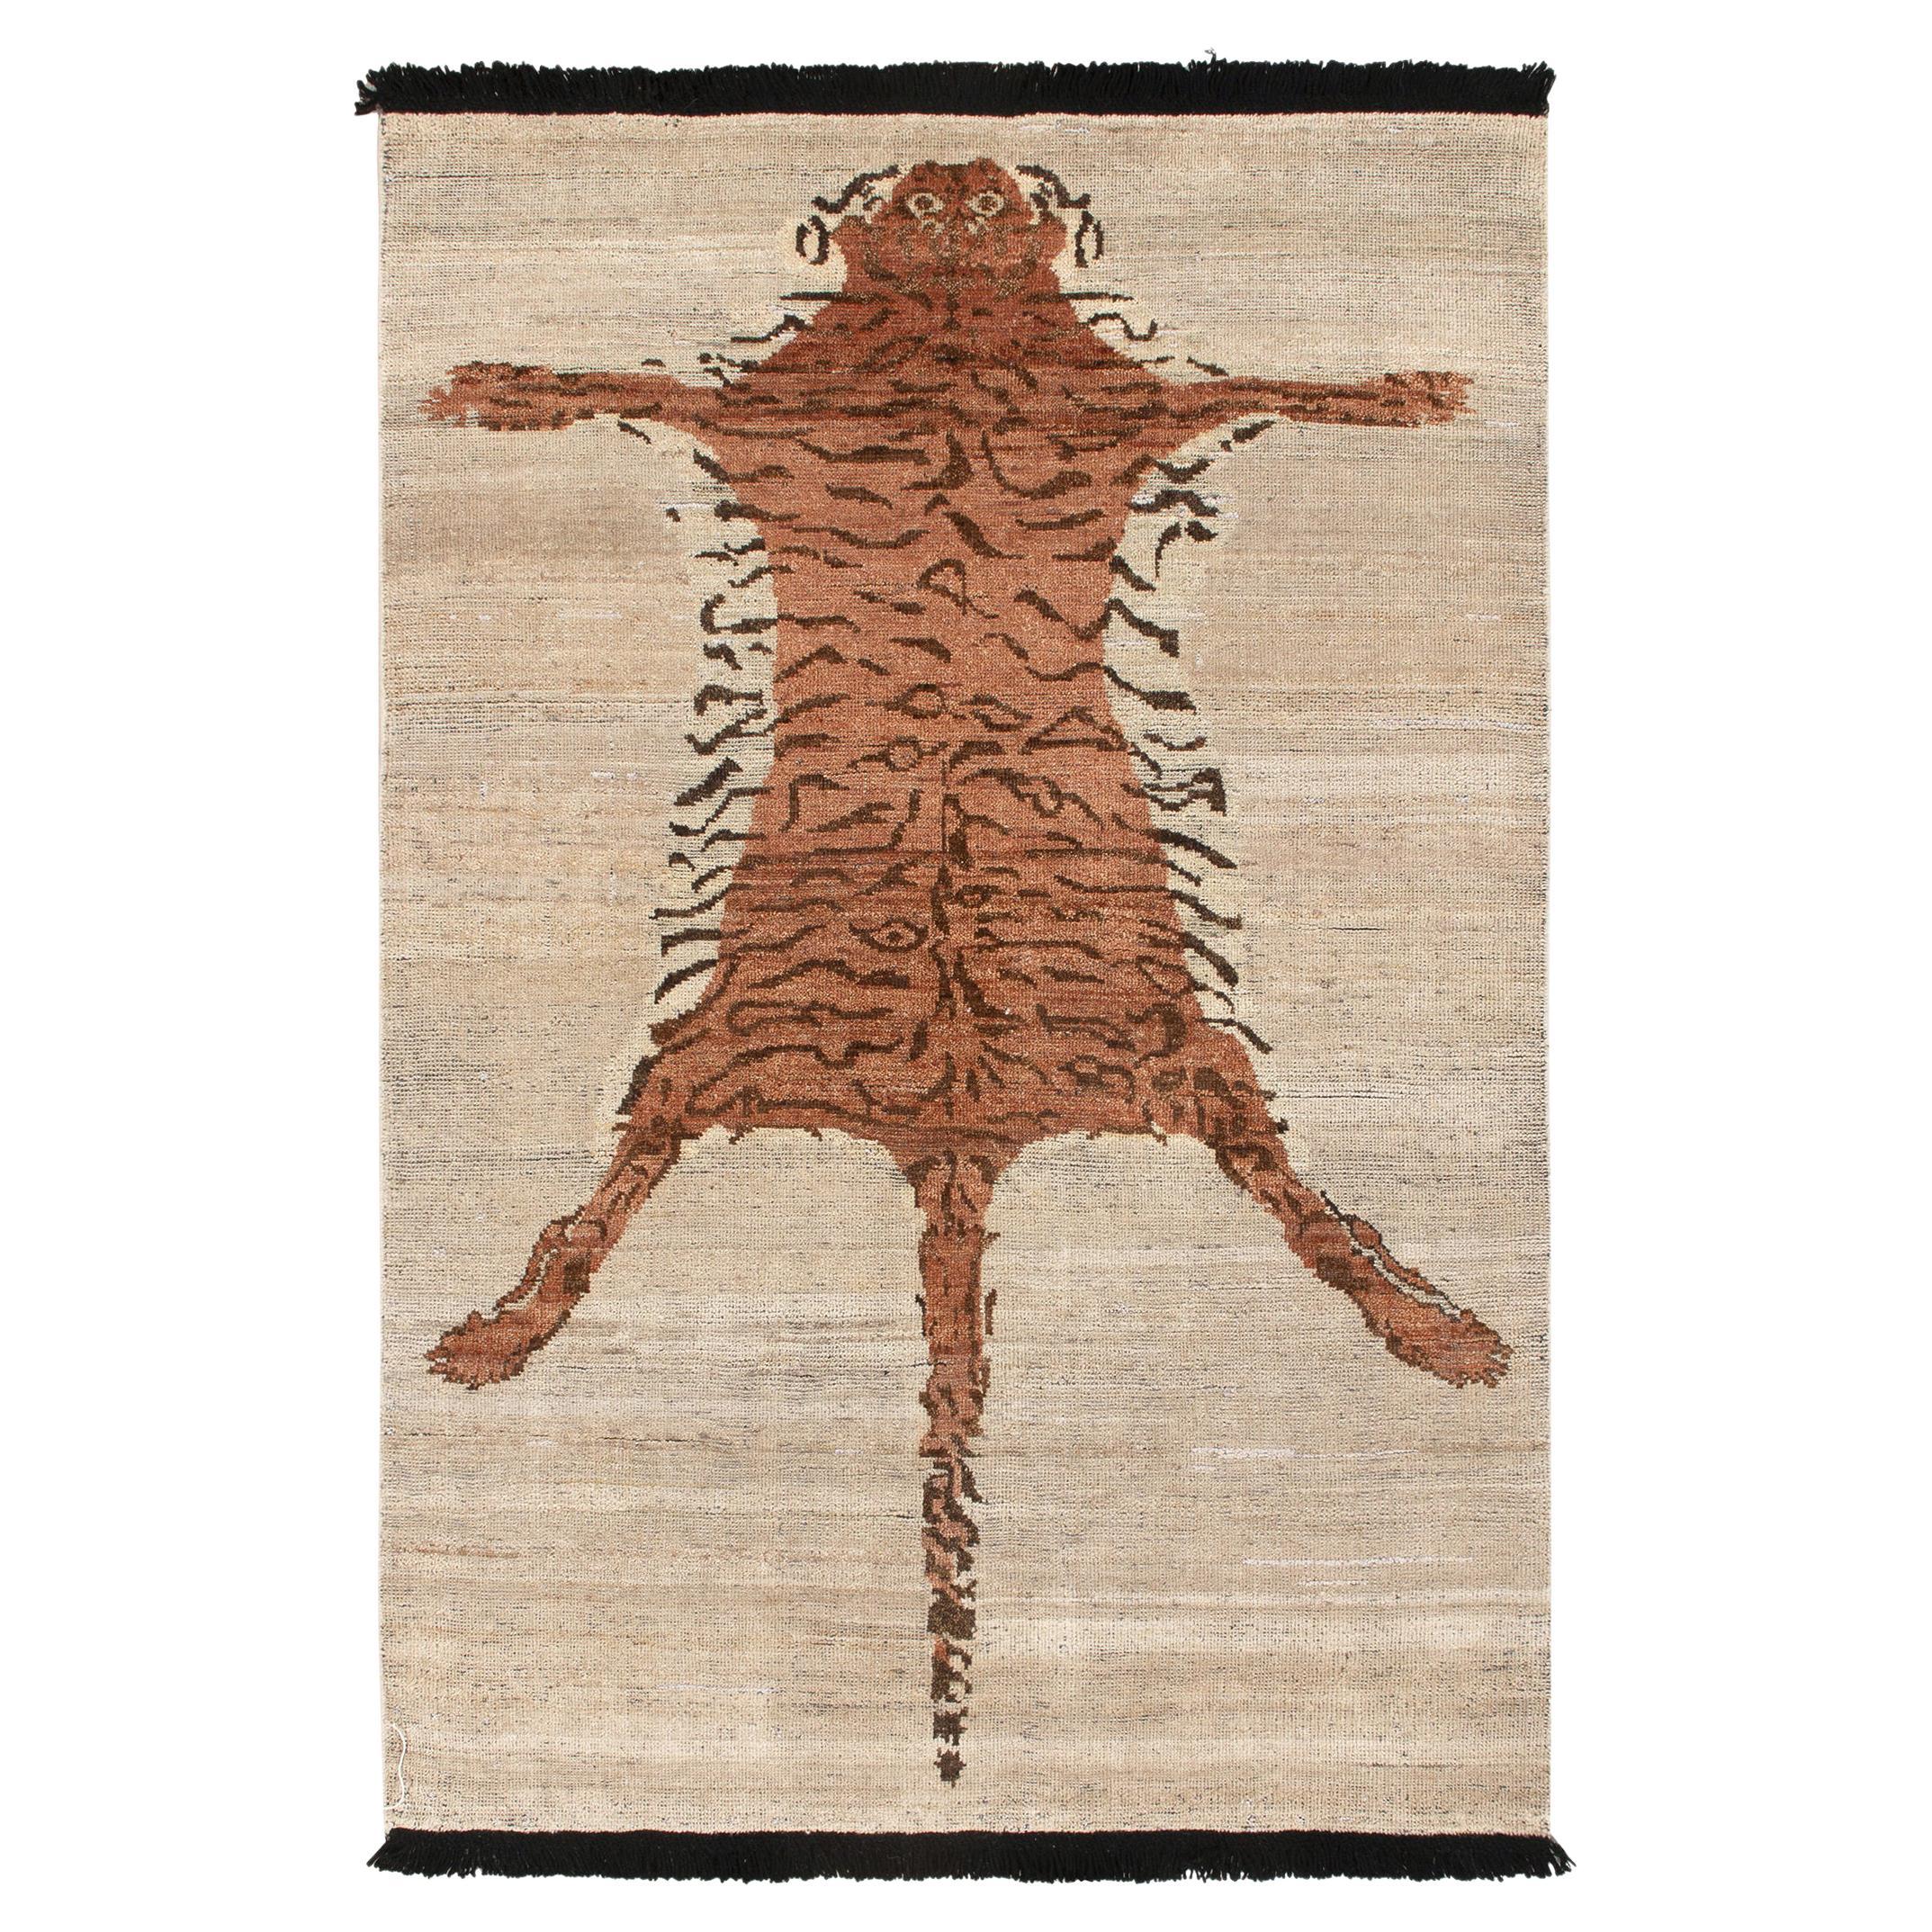 Rug & Kilim's Classic Style Contemporary Tiger Rug in Beige-Brown, Orange